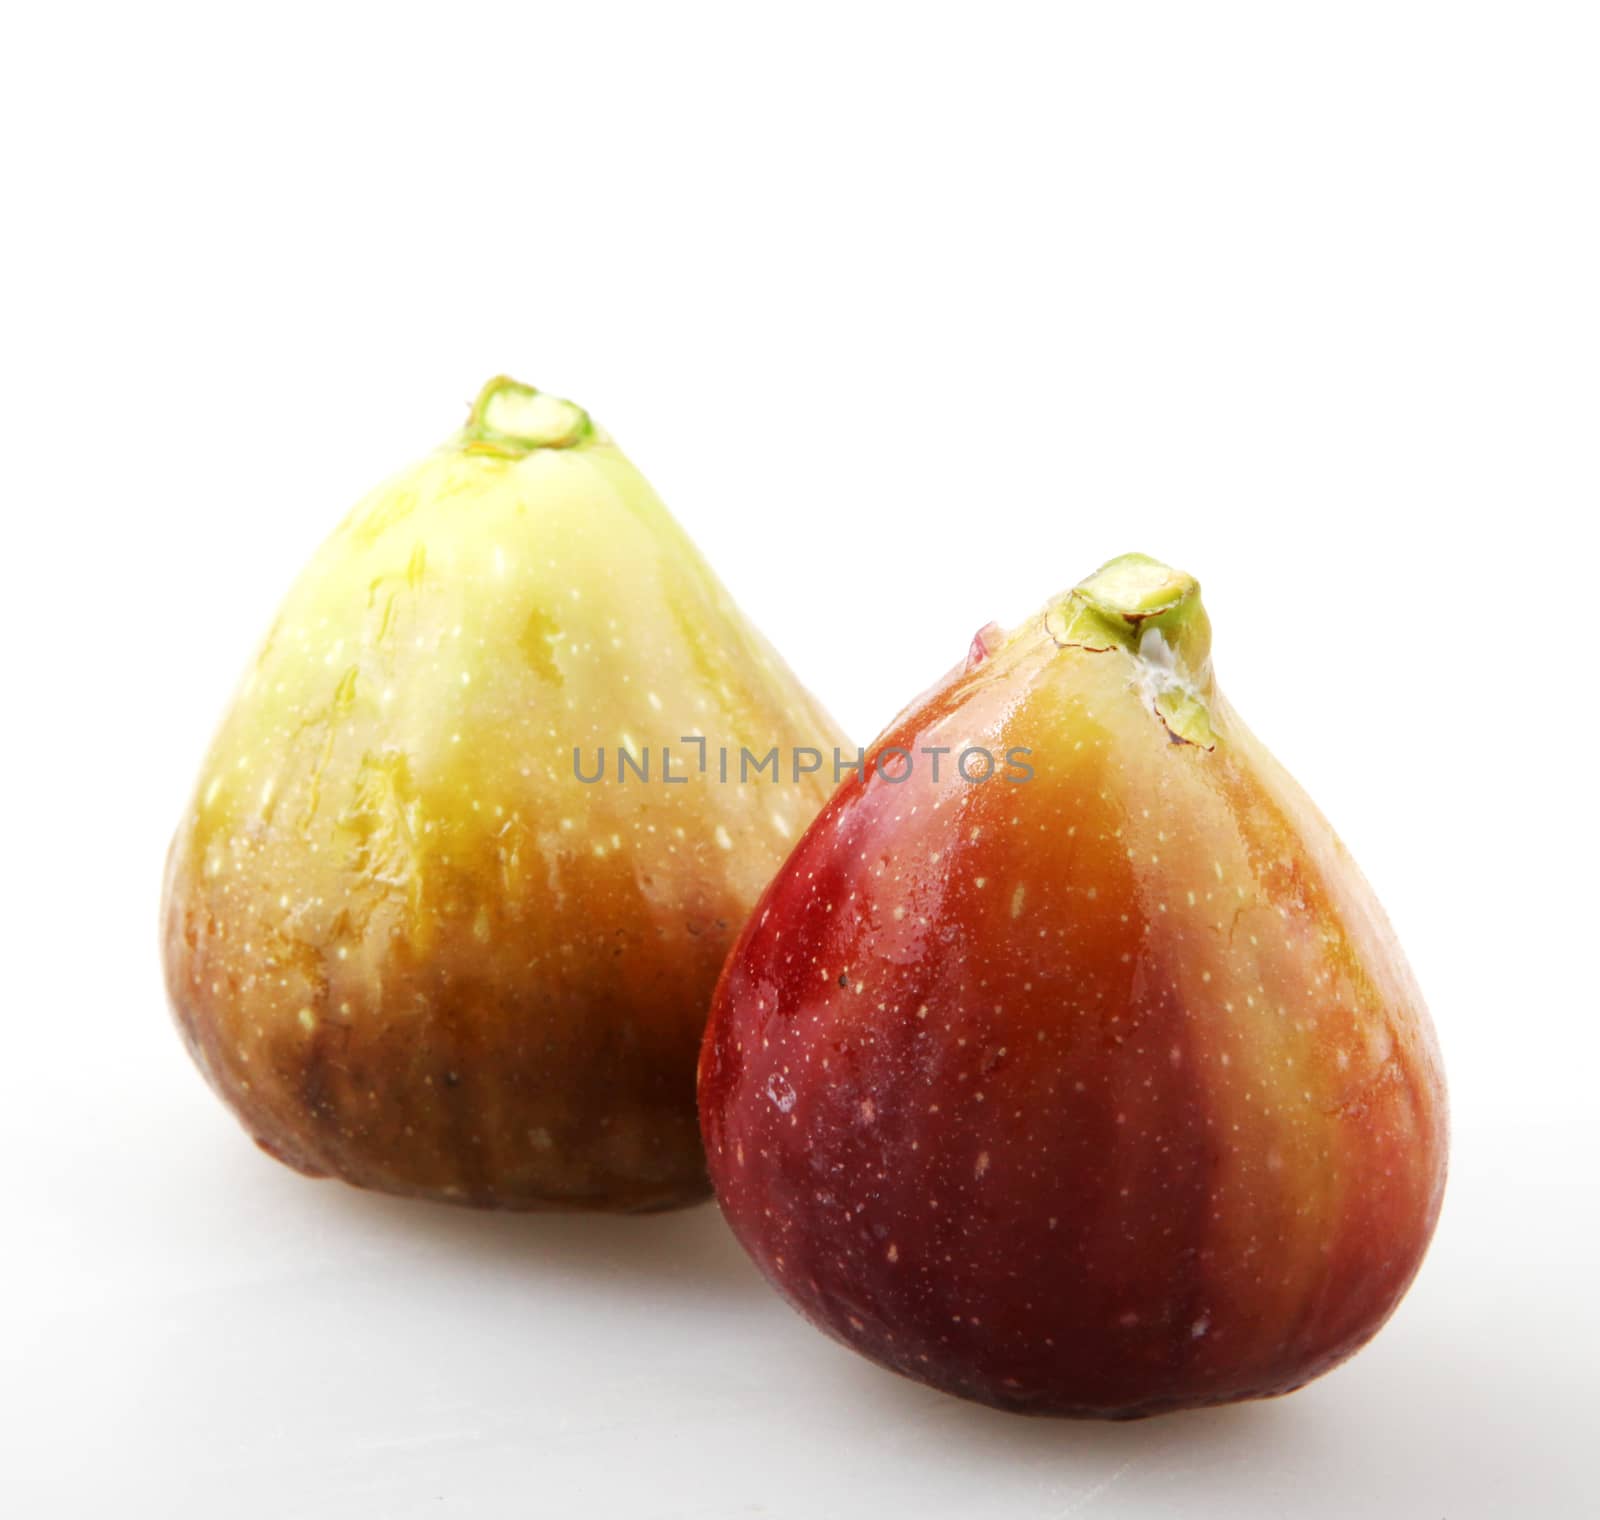 Close-Up Of Fig Against White Background 